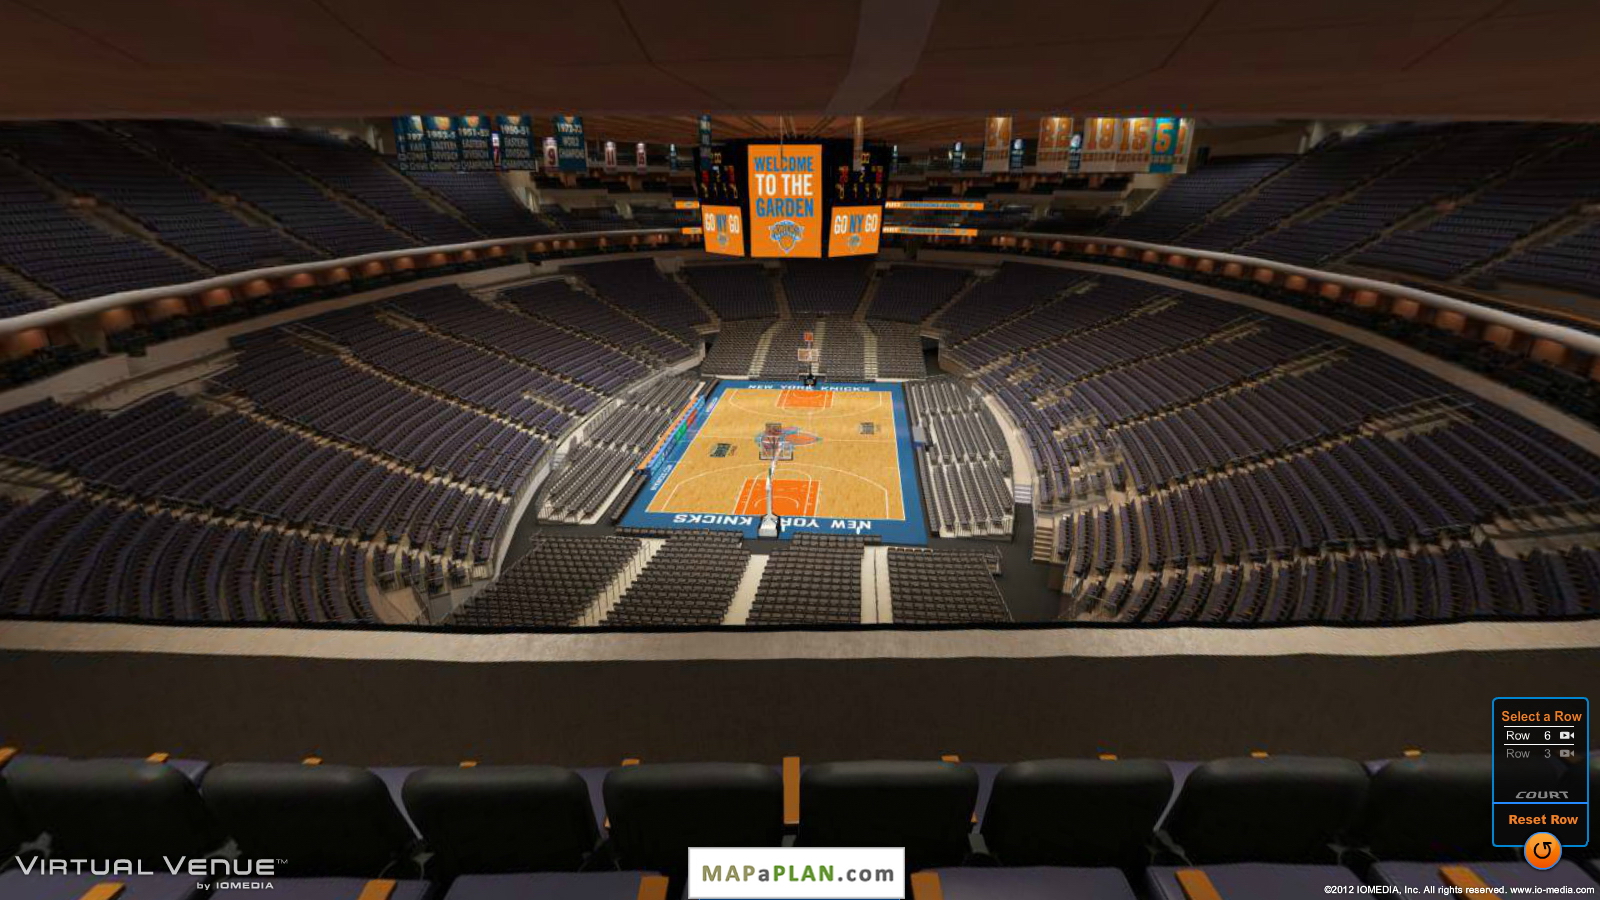 Madison square garden seating chart View from section 417